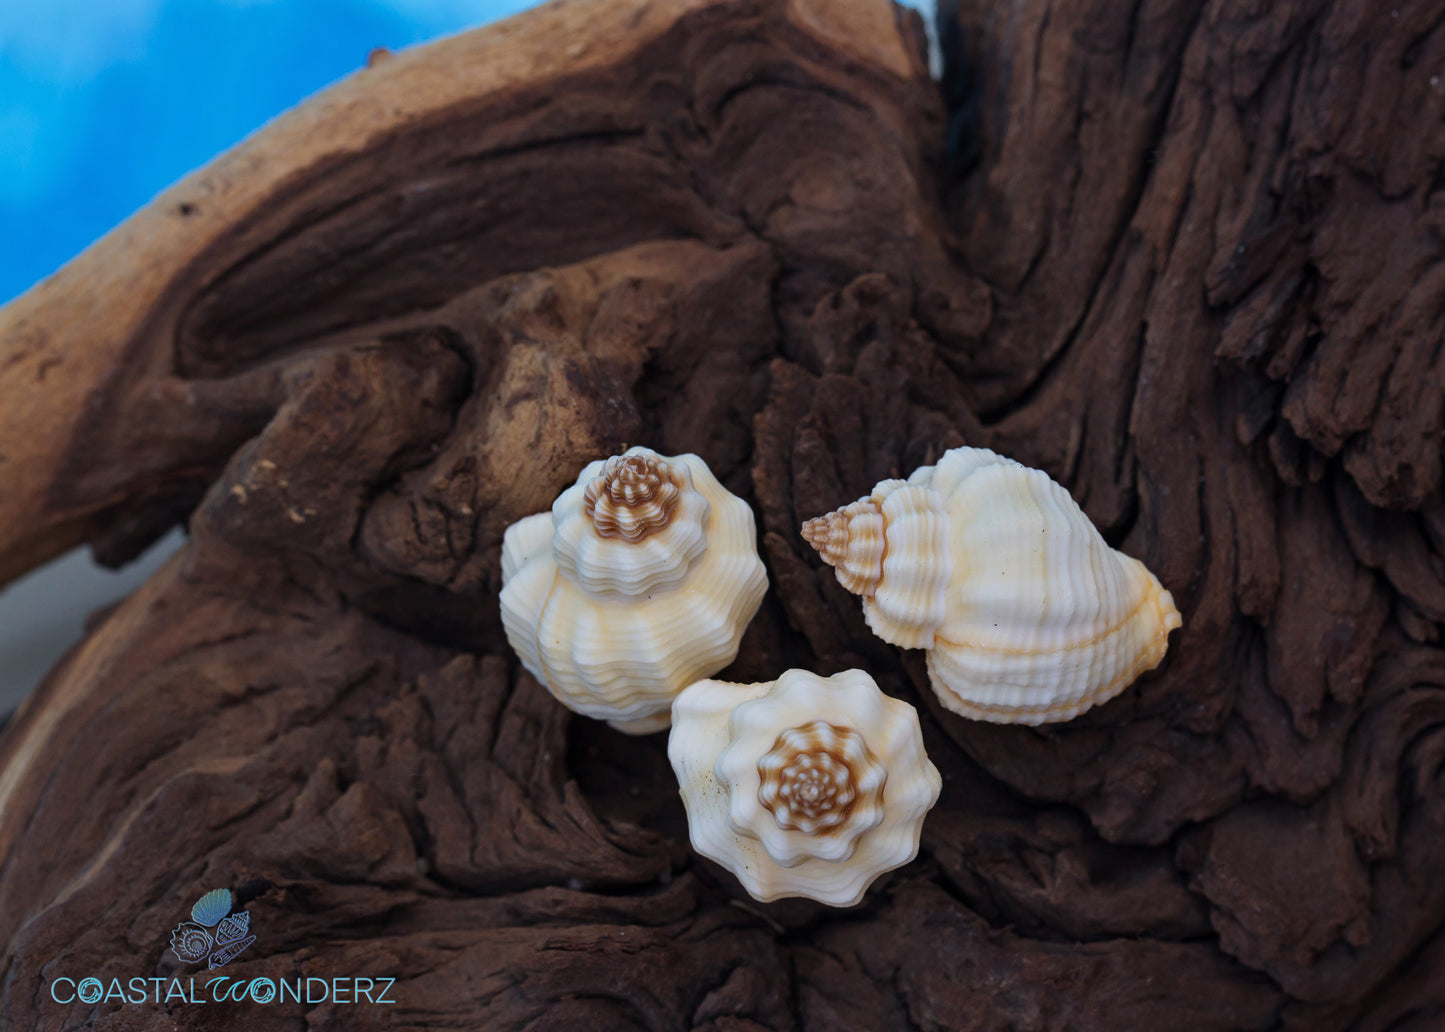 Goblet Shell (Tranquebar Goblet and Cantharus tranquebaricus)